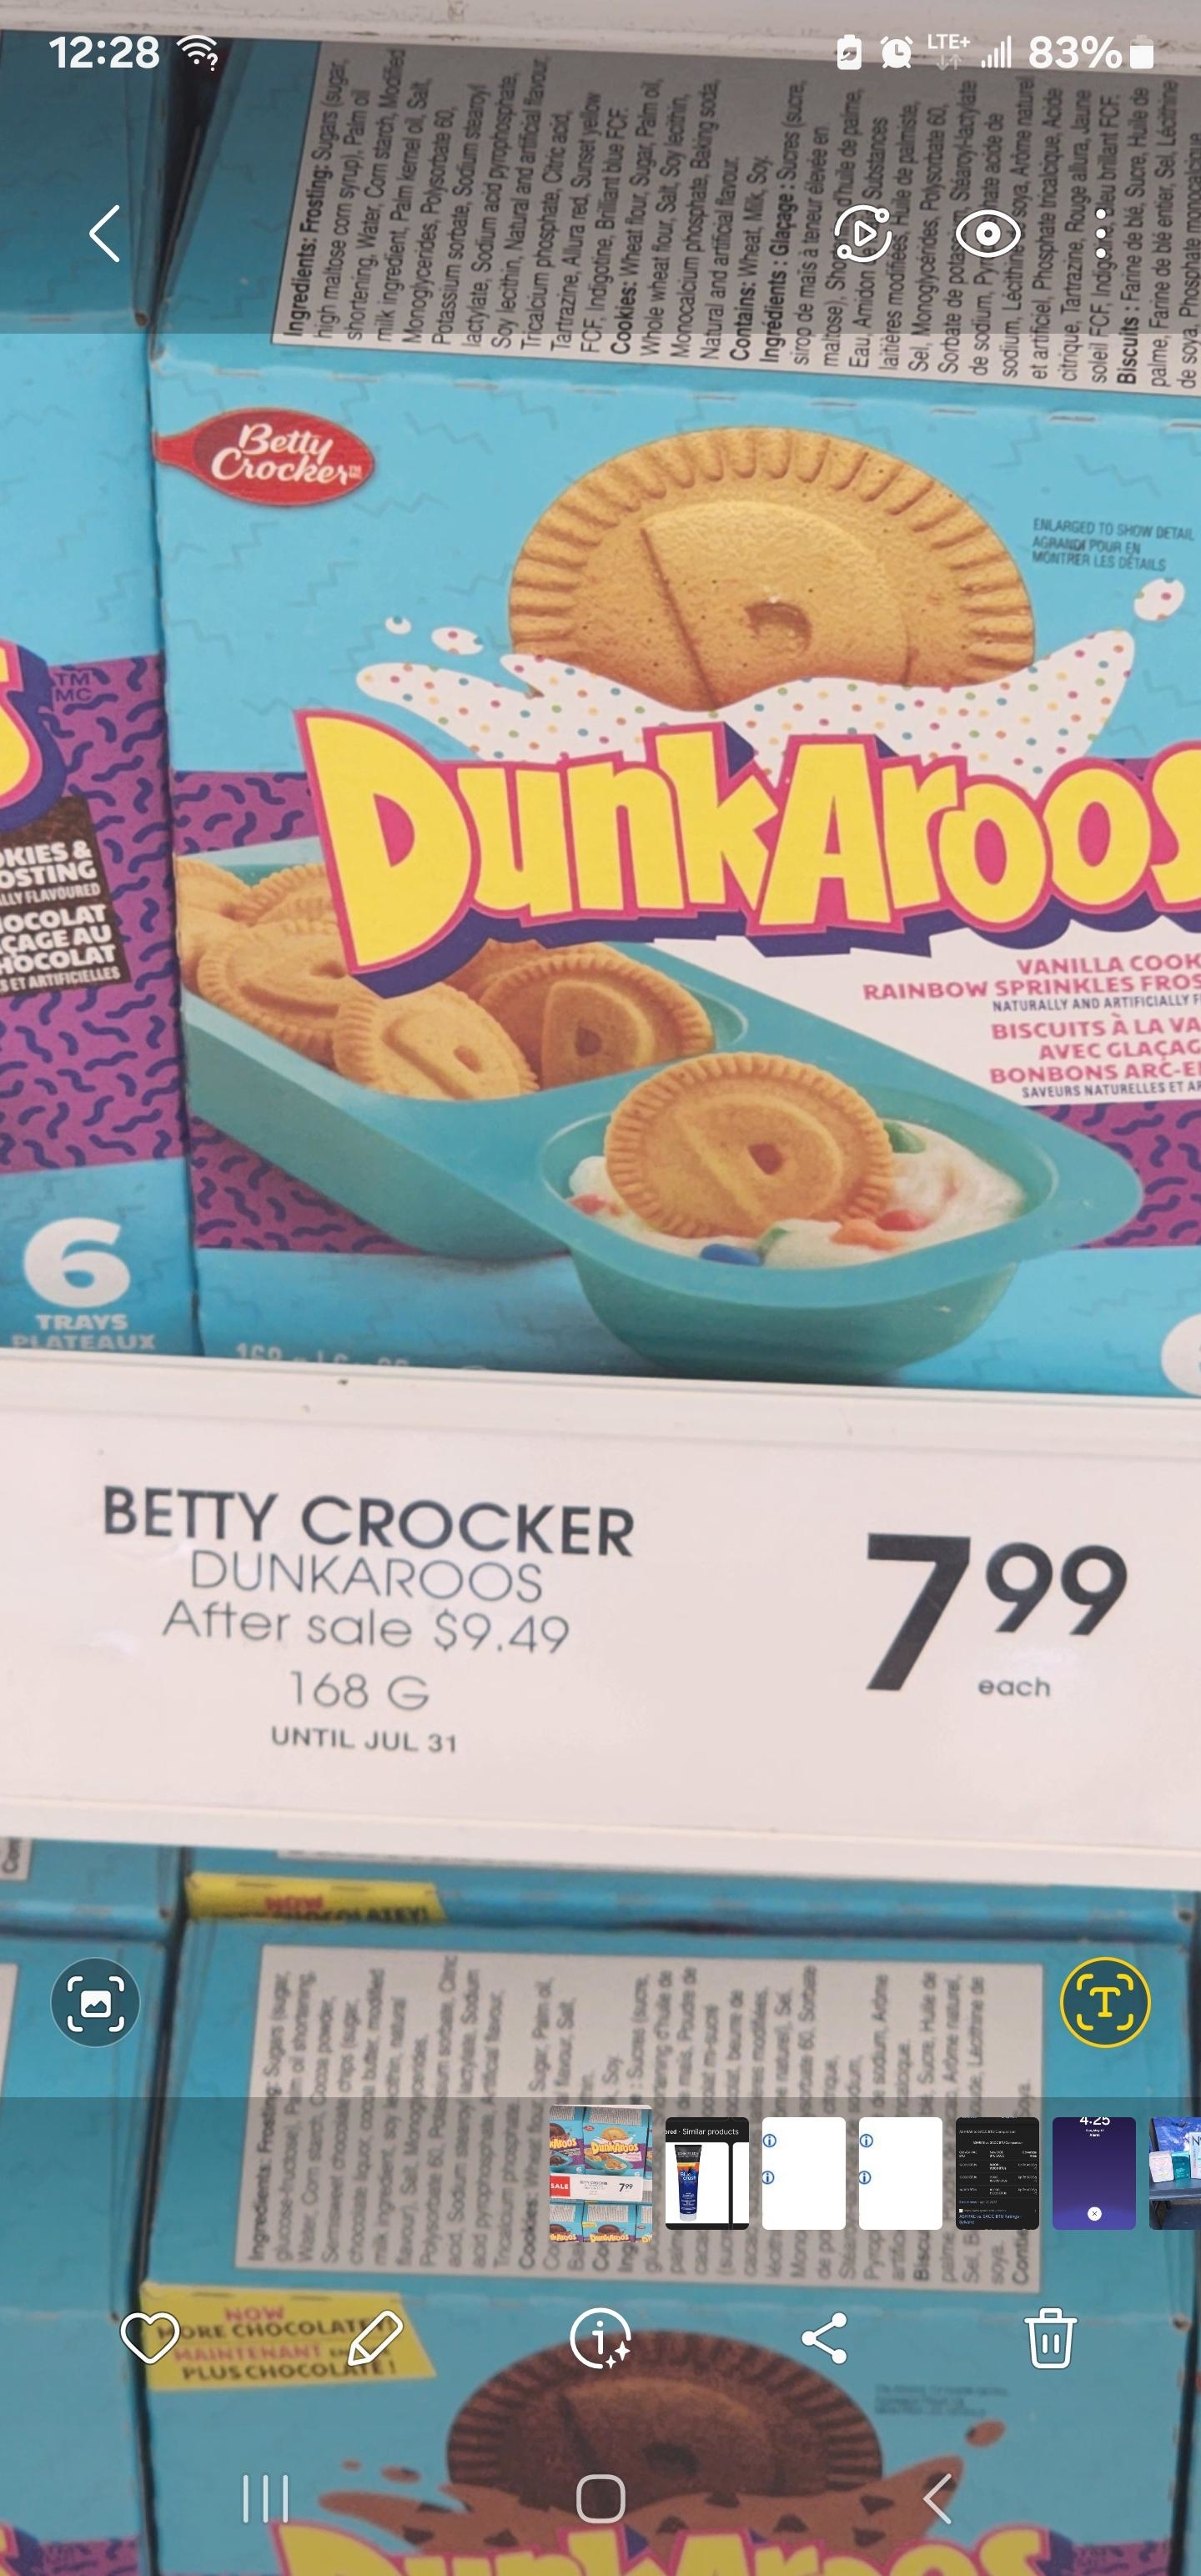 Box of Betty Crocker Dunkaroos snack displayed on a store shelf with a sale sign for $7.99, original price $9.49